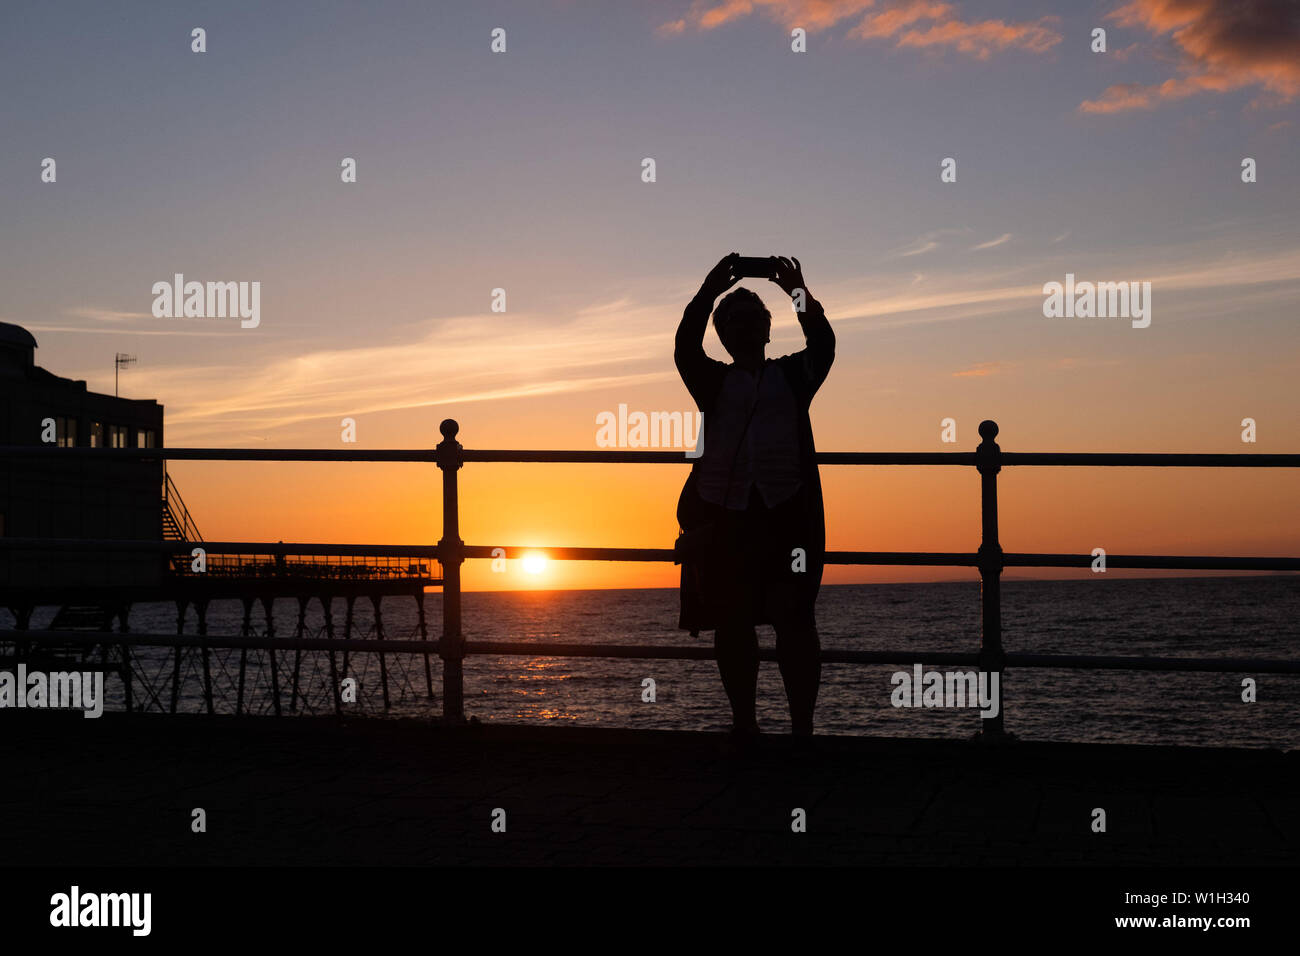 Aberystwyth Wales UK, Tuesday 02 July 2019  UK Weather: A woman takes a selfie, silhouetted against the sky as they watch the glorious sunset in Aberystwyth on the Cardigan Bay coast, west Wales.   photo credit: Keith Morris//Alamy Live News Stock Photo